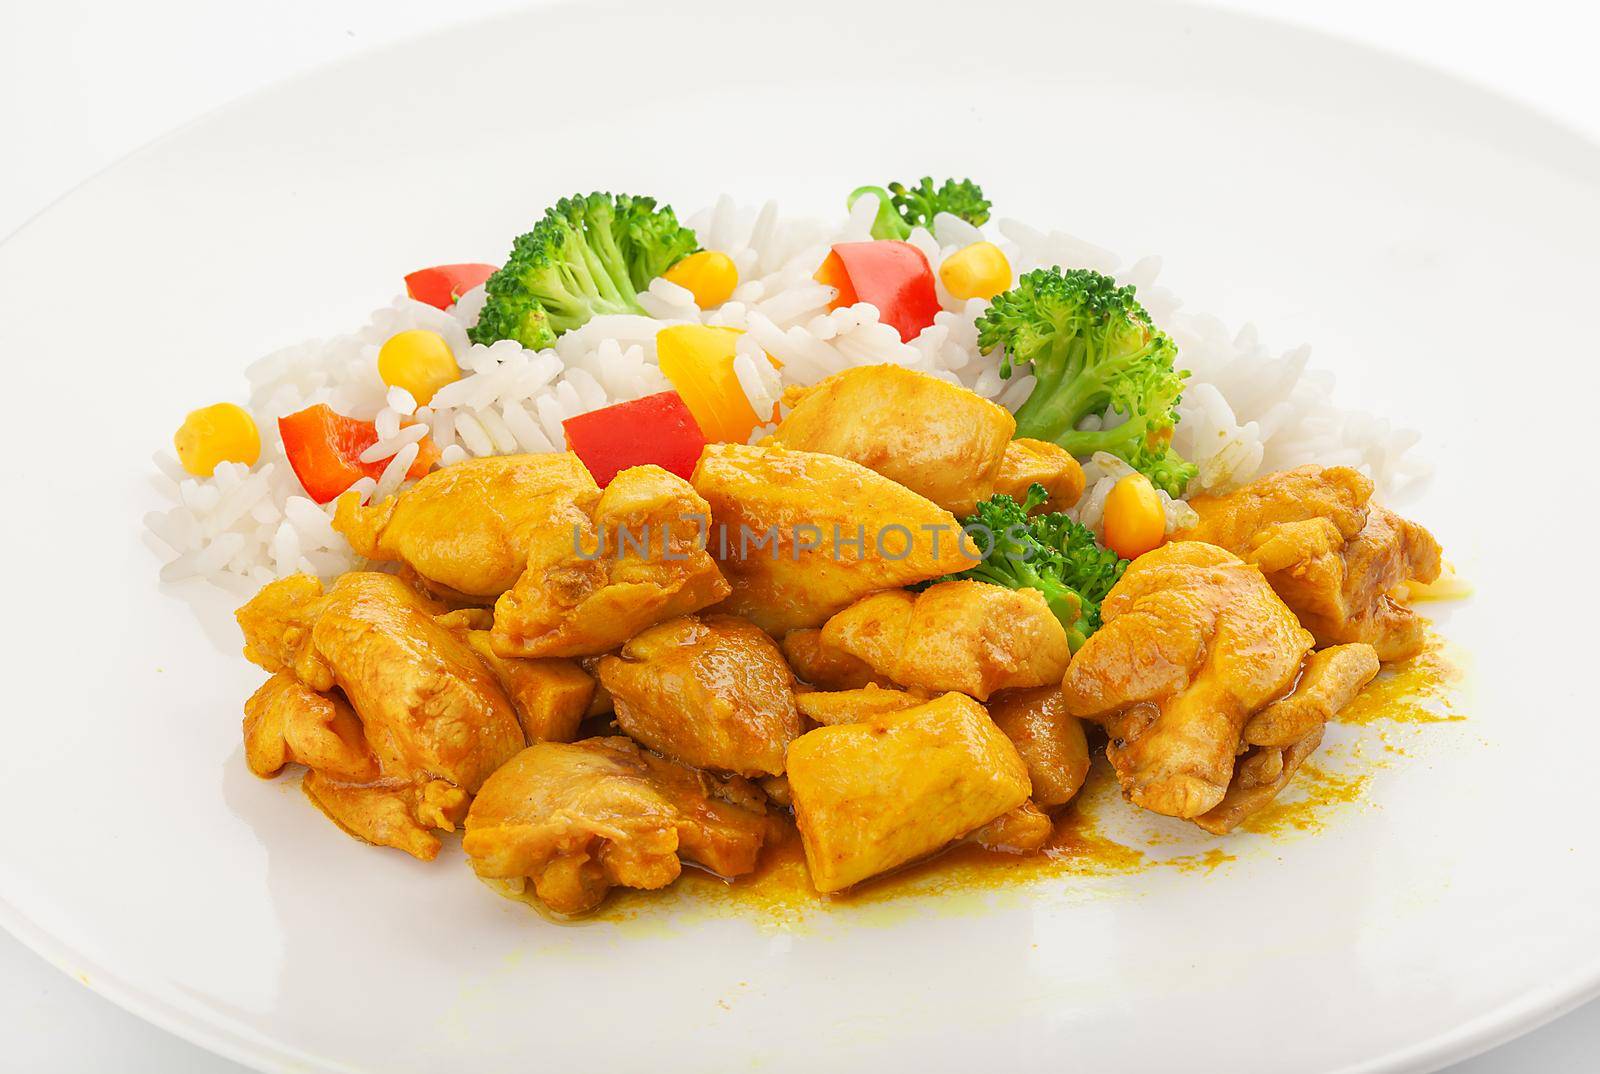 Chicken curry with rice, red pepper, broccoli and corn on the plate